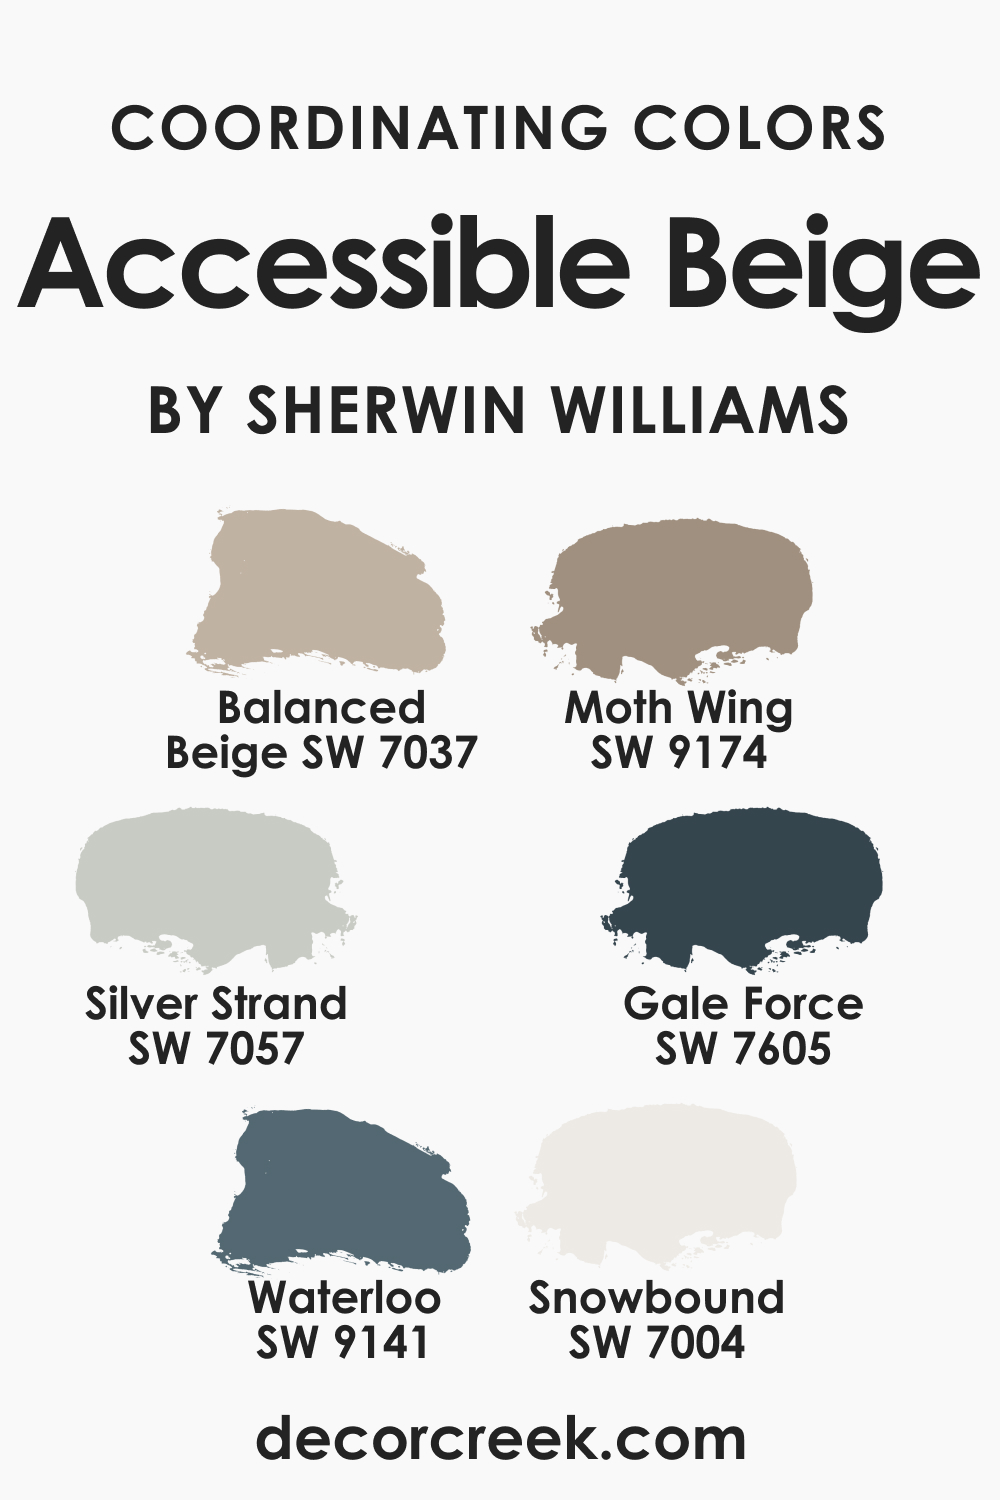 Coordinating Colors of Accessible Beige SW 7036